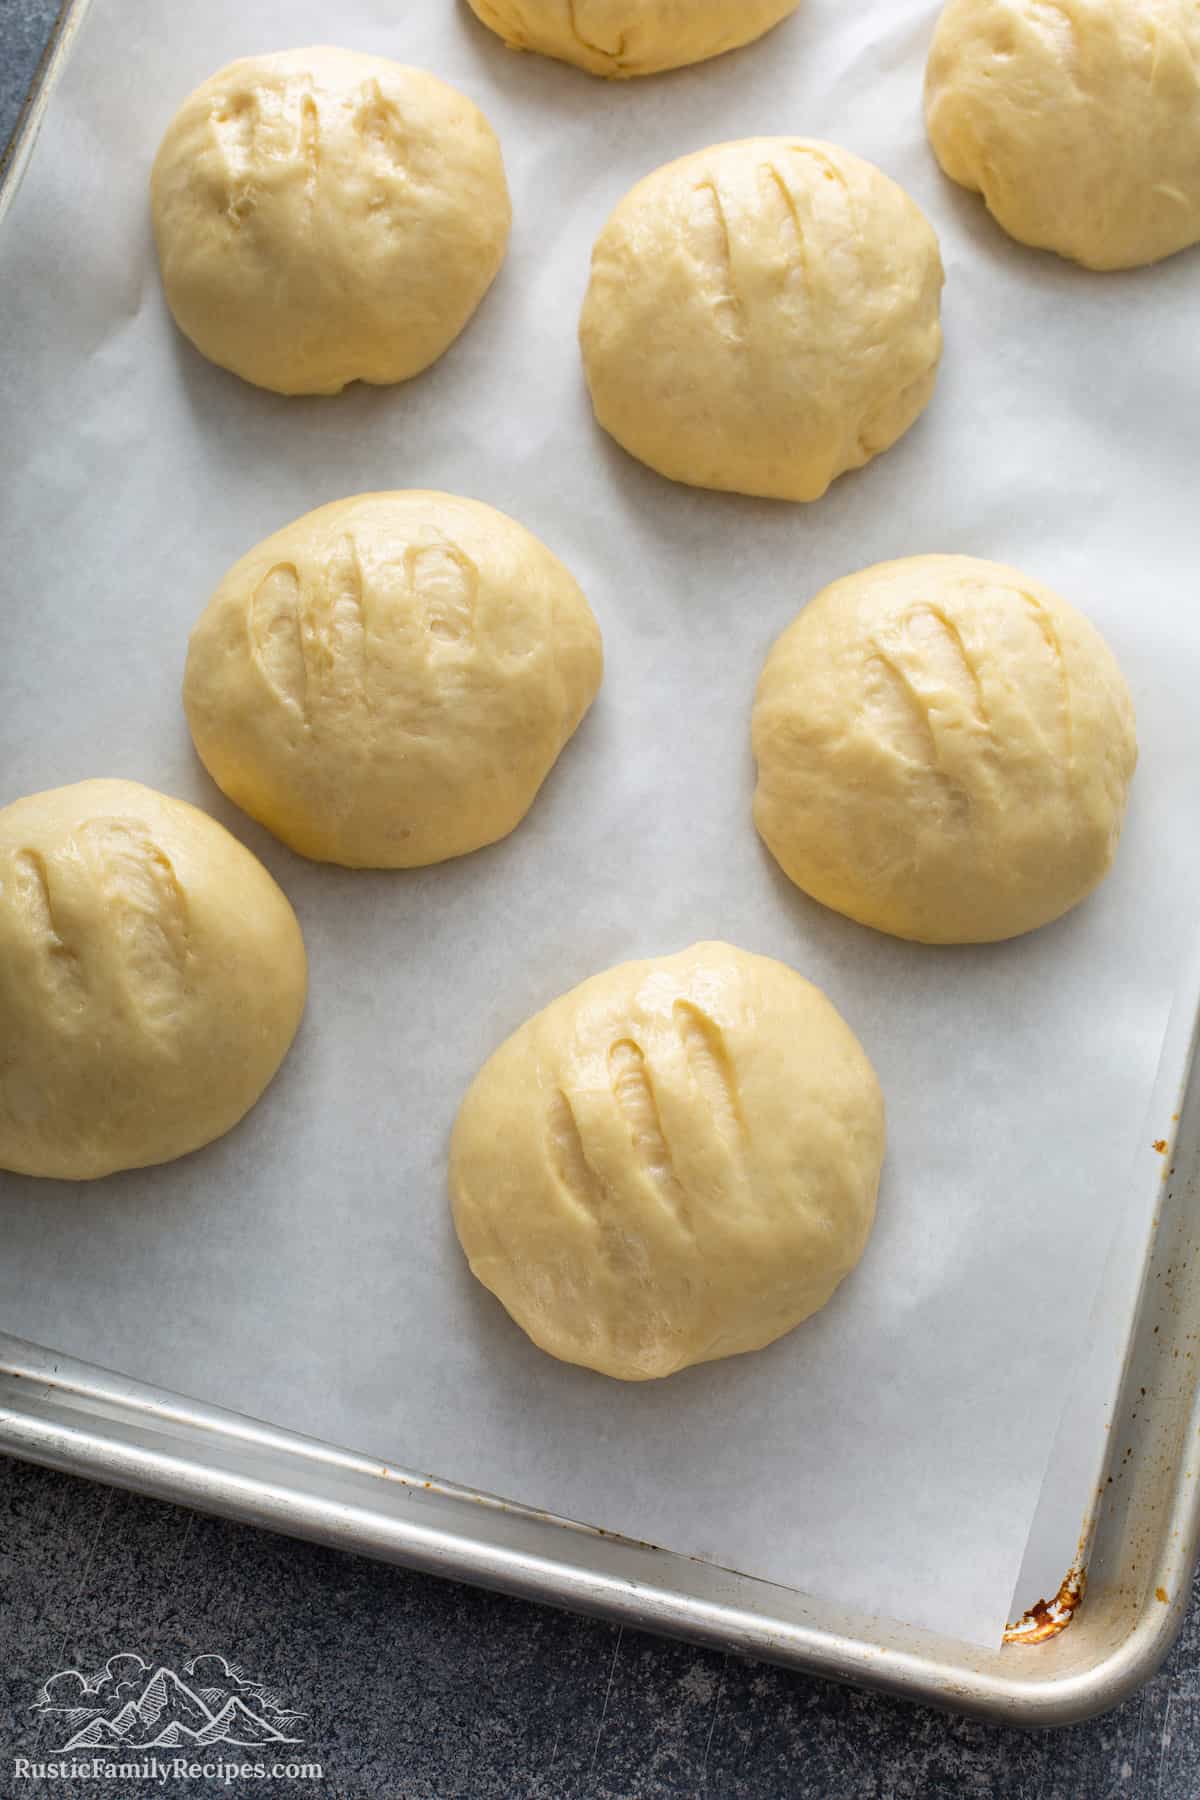 Pan dulce on parchment-lined baking sheet before baking